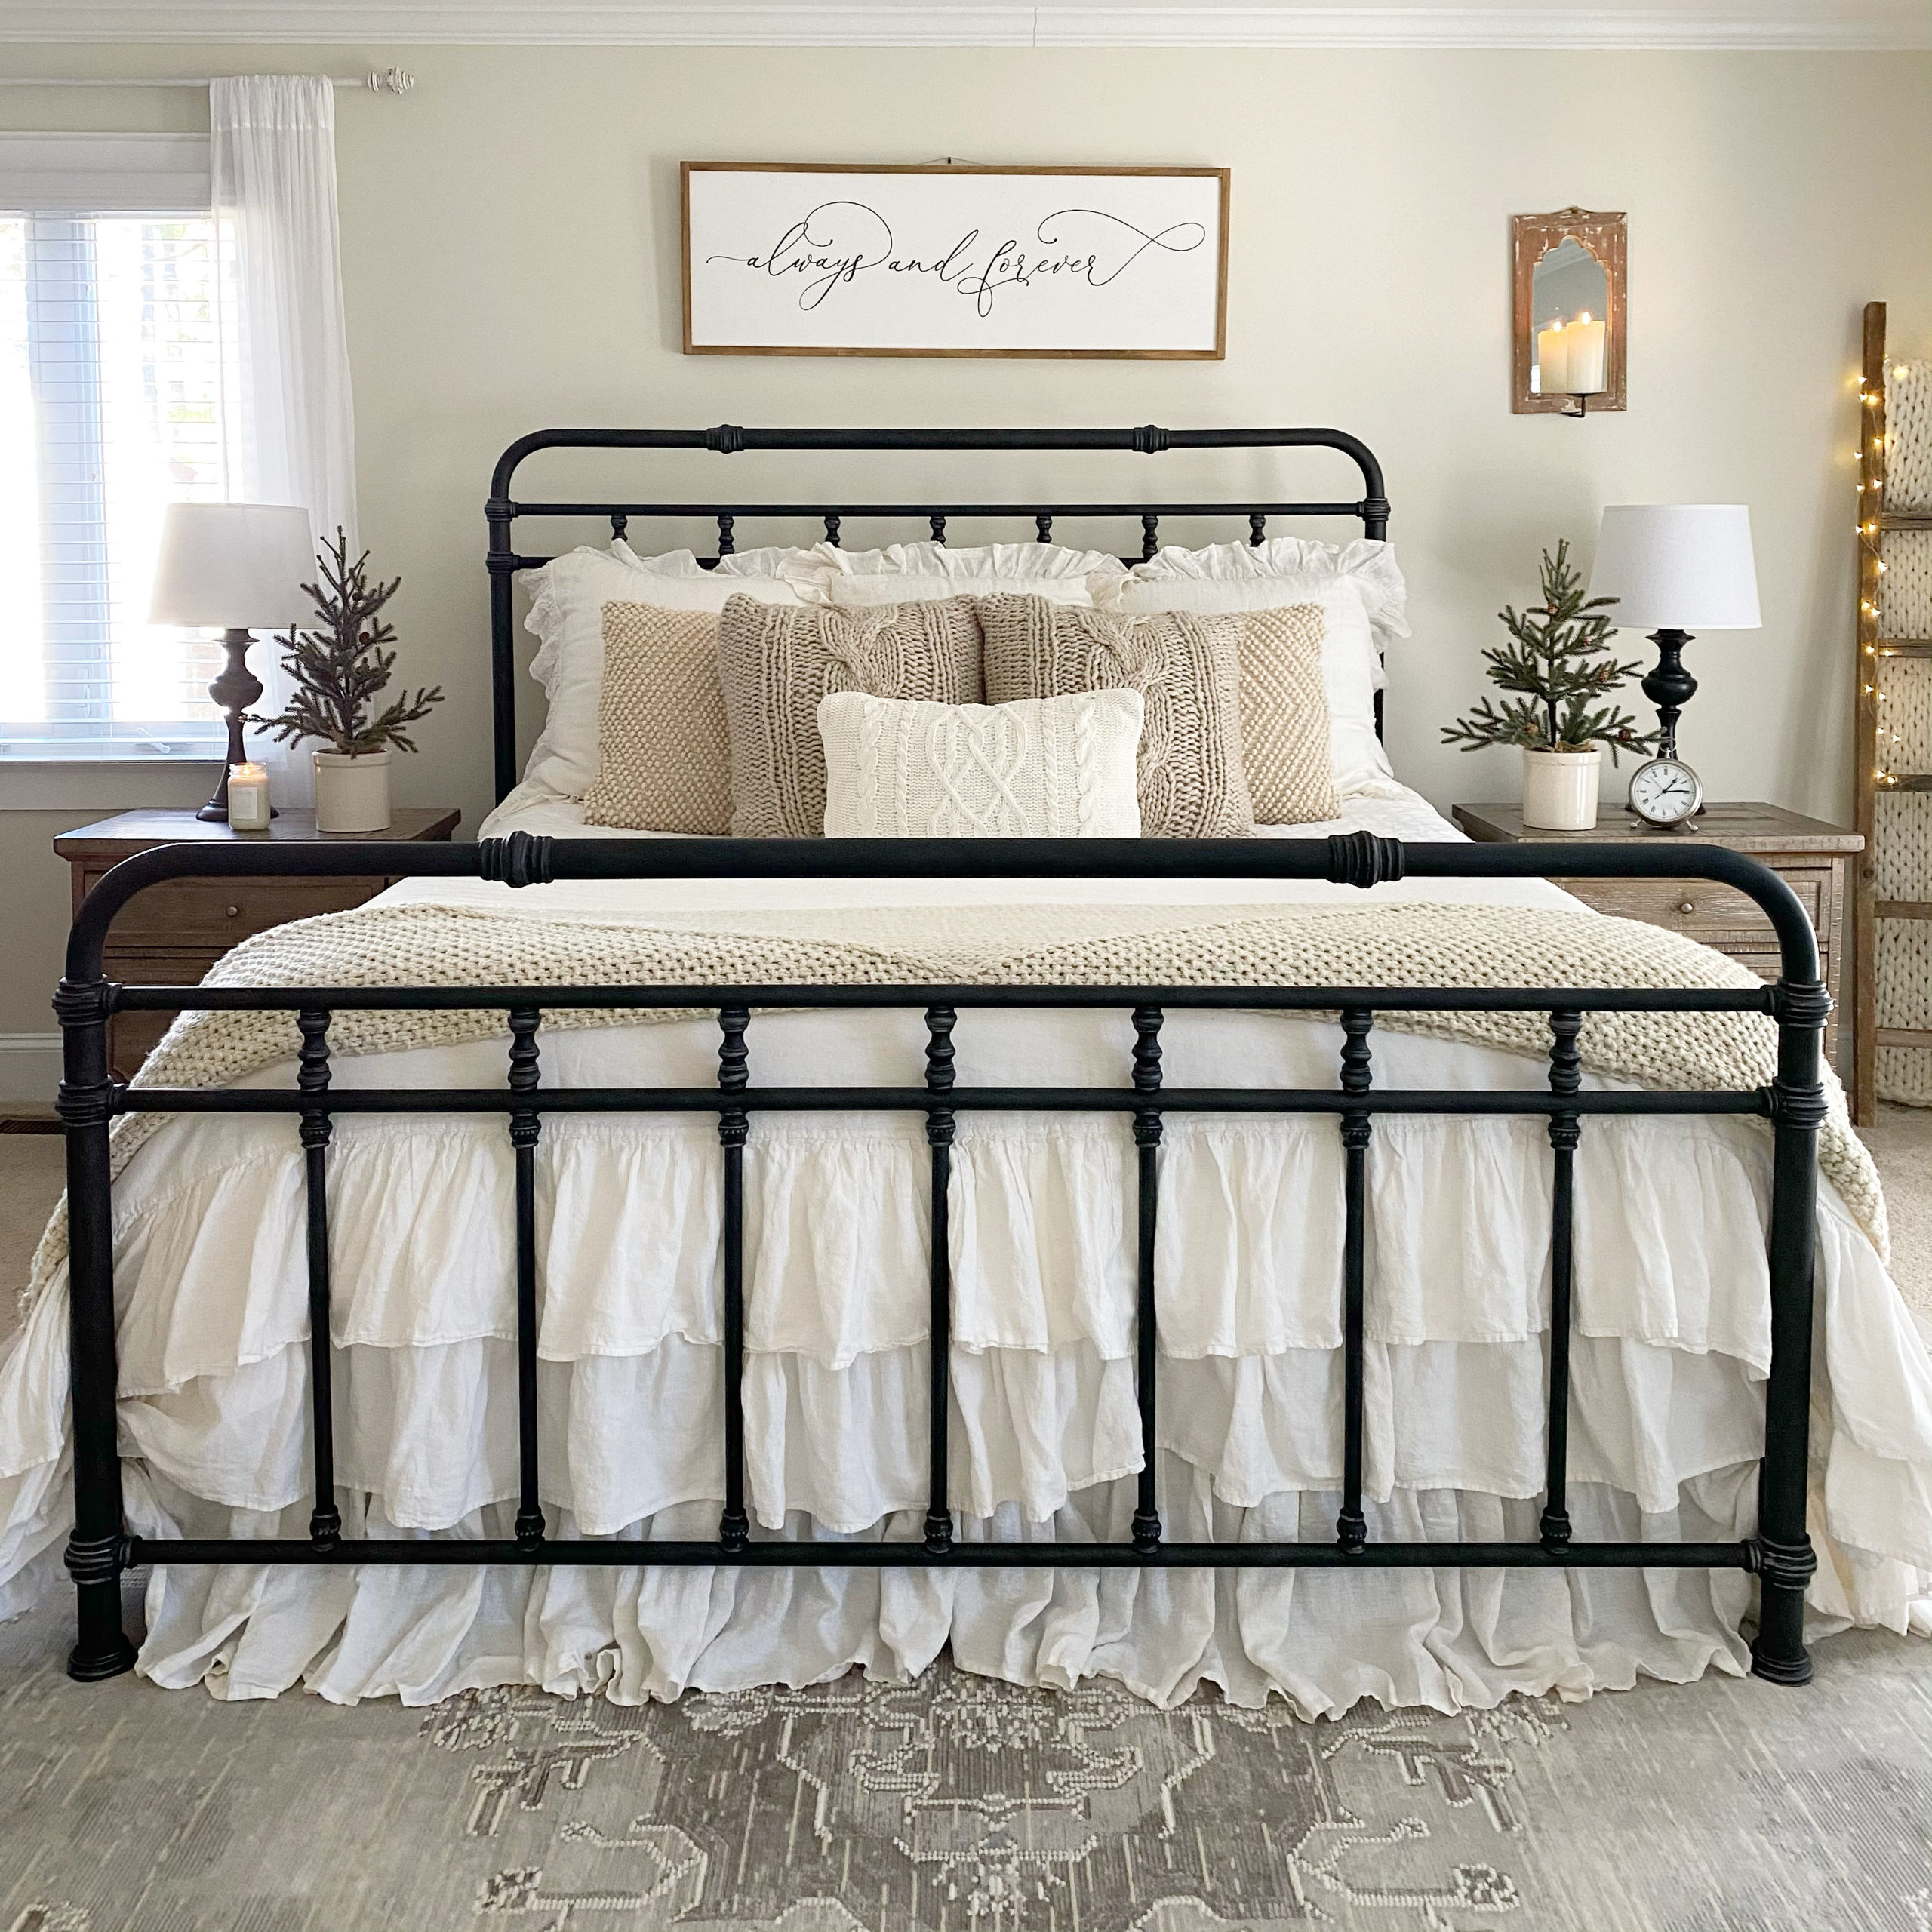 Black iron bed with white and beige bedding and pillows.